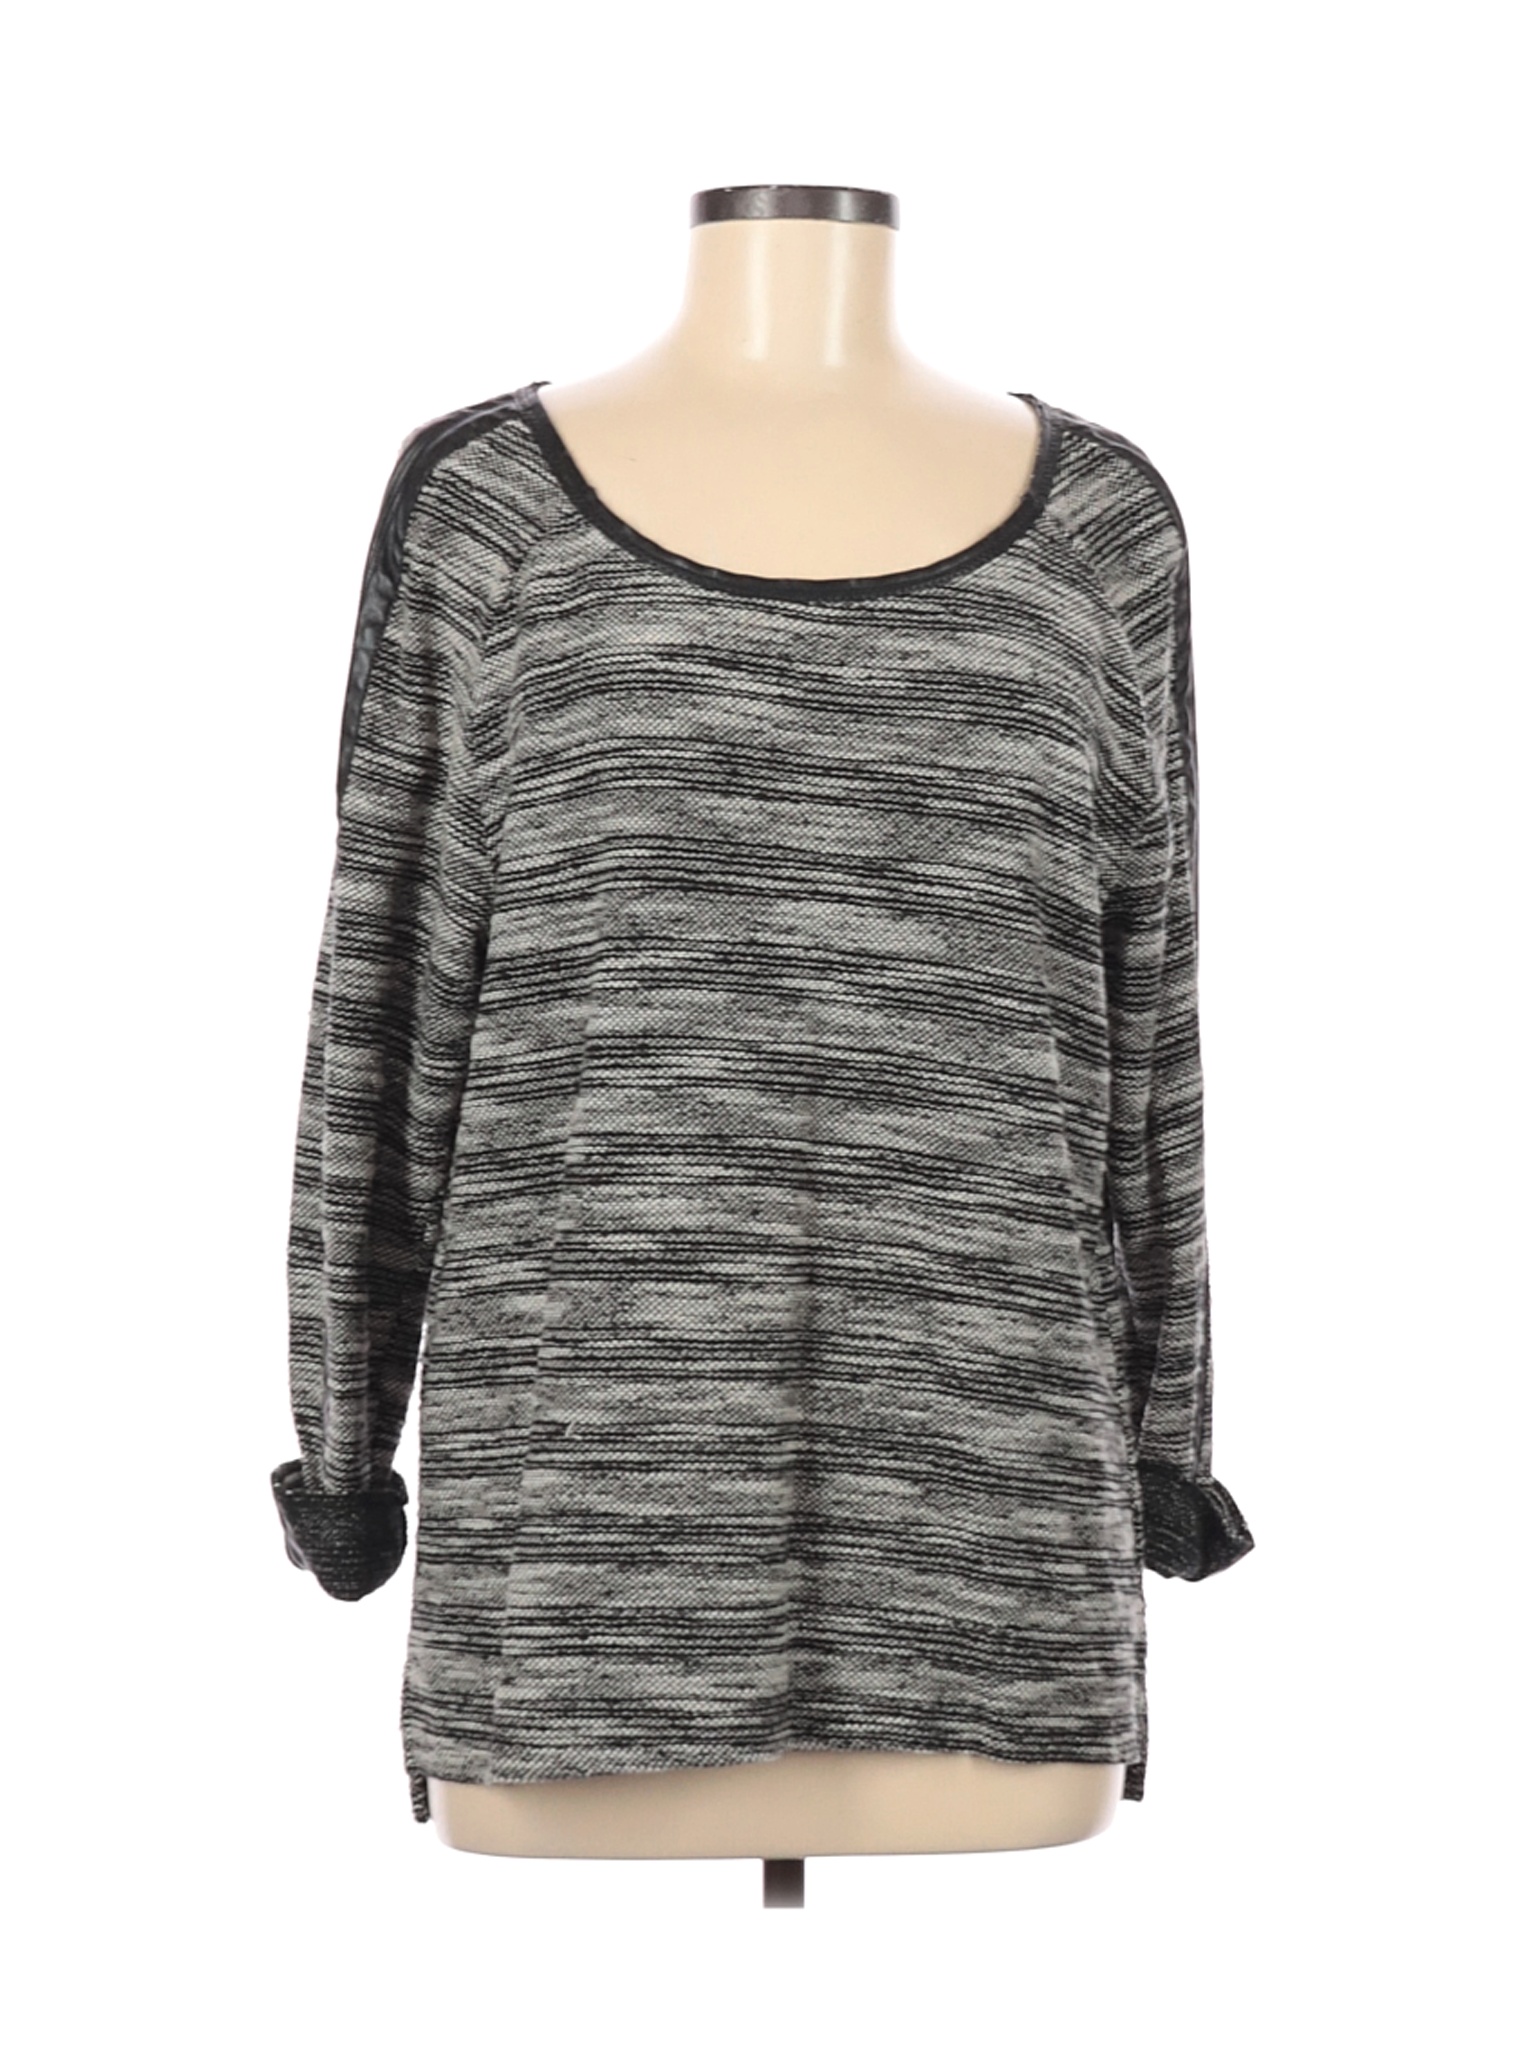 TWO by Vince Camuto Women Gray Pullover Sweater M | eBay